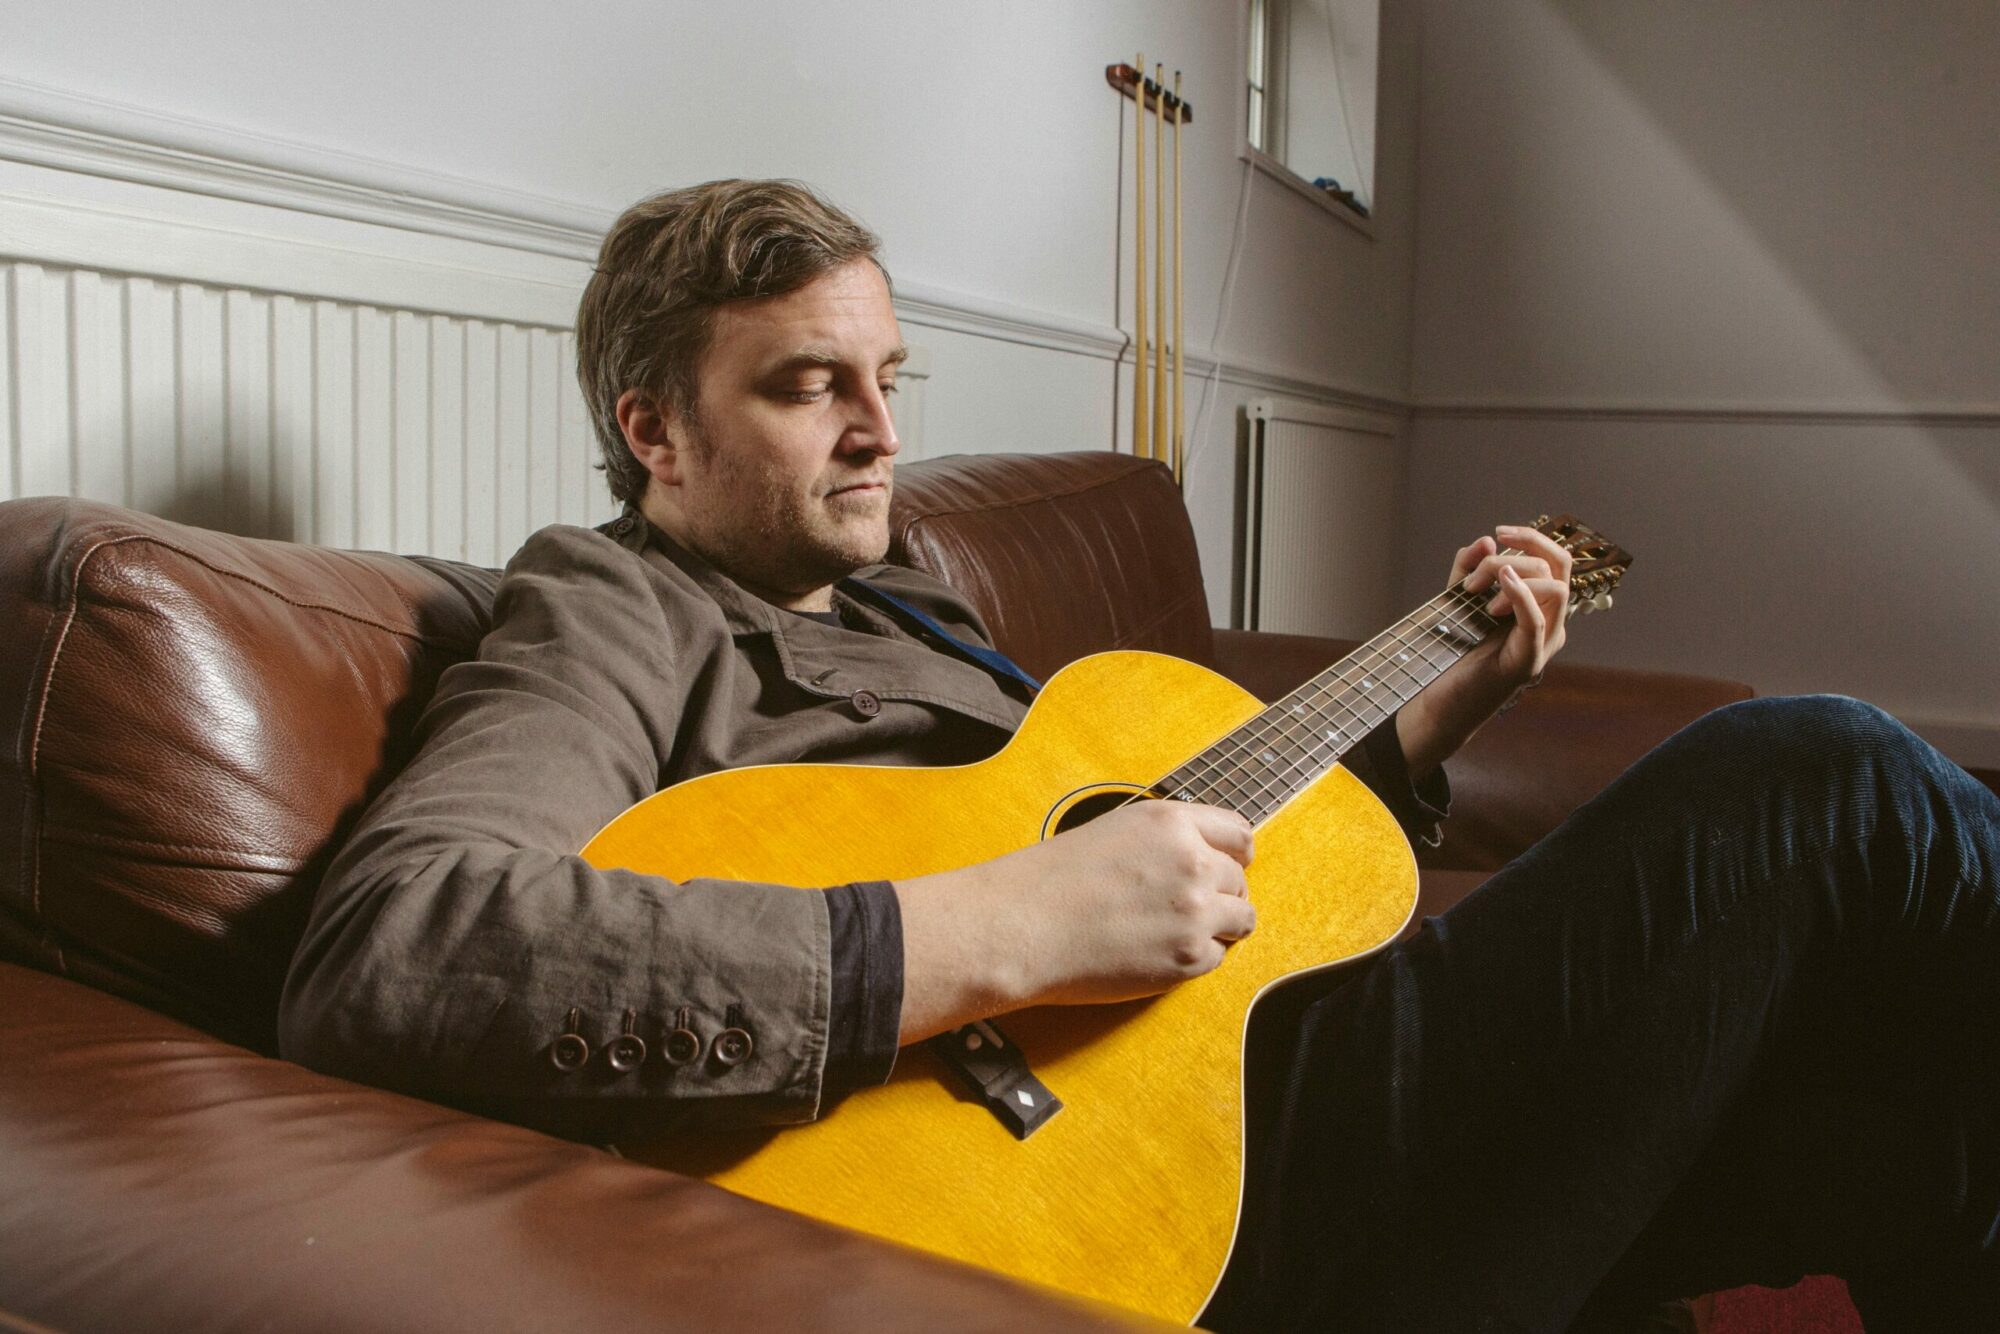 Image name James Walsh Starsailor at Fulford Arms York scaled the 14 image from the post Events in Yorkshire.com.